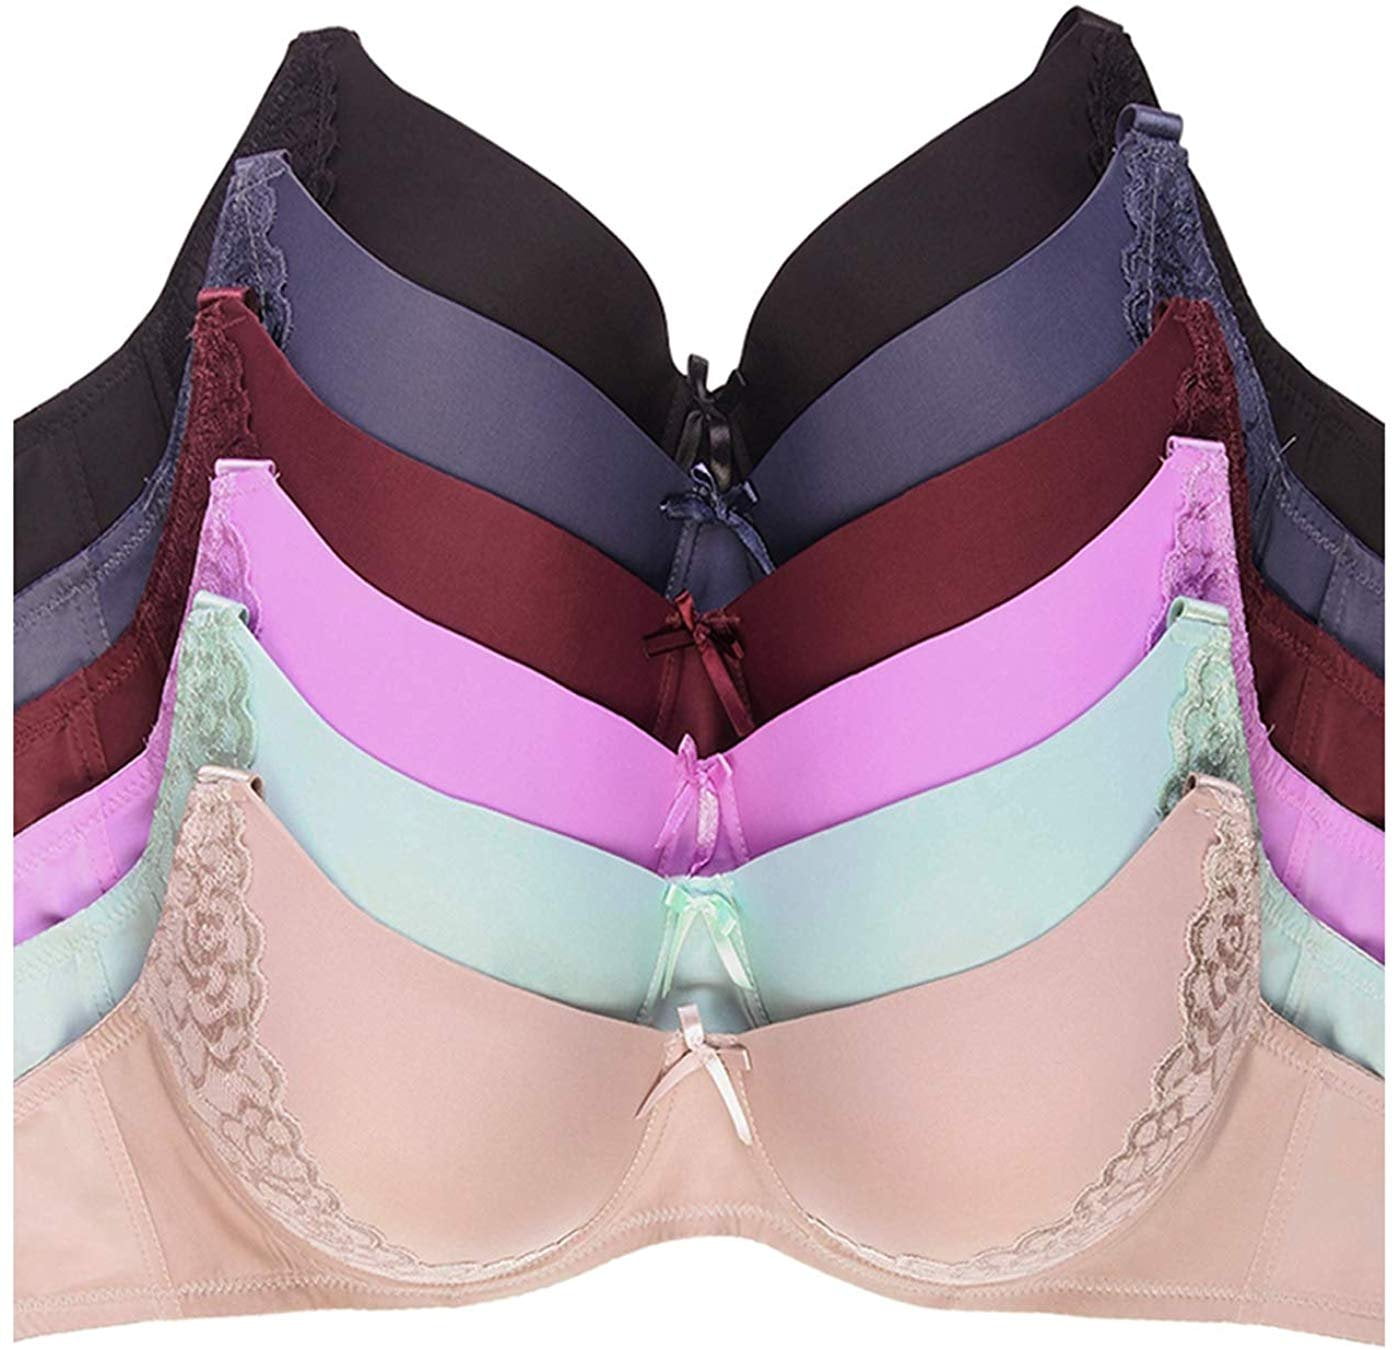 Womens 6 Pack of Everyday Plain, Lace, Wireless Bra